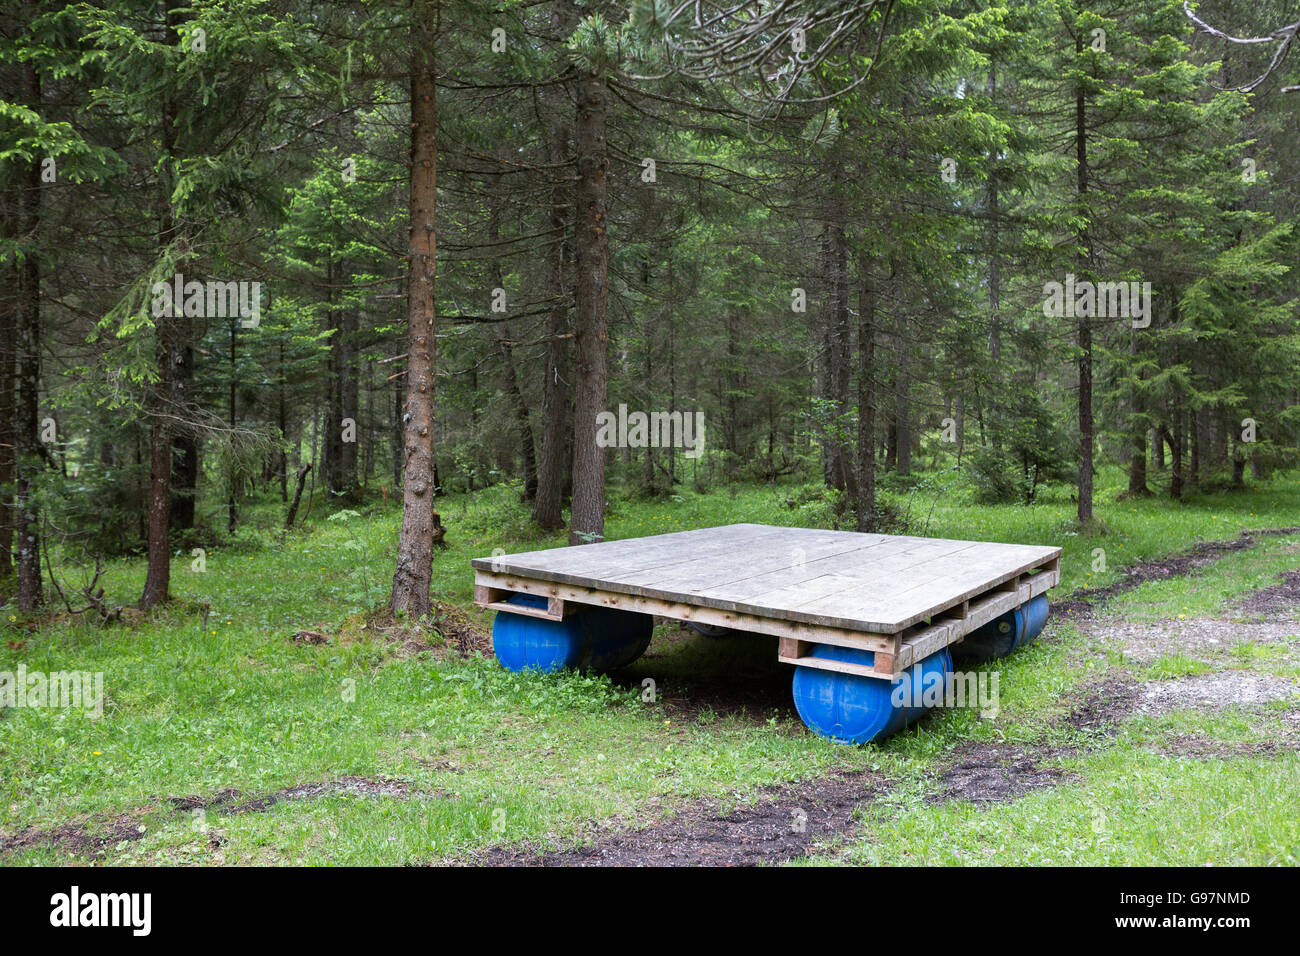 A raft abandoned in a forest Stock Photo